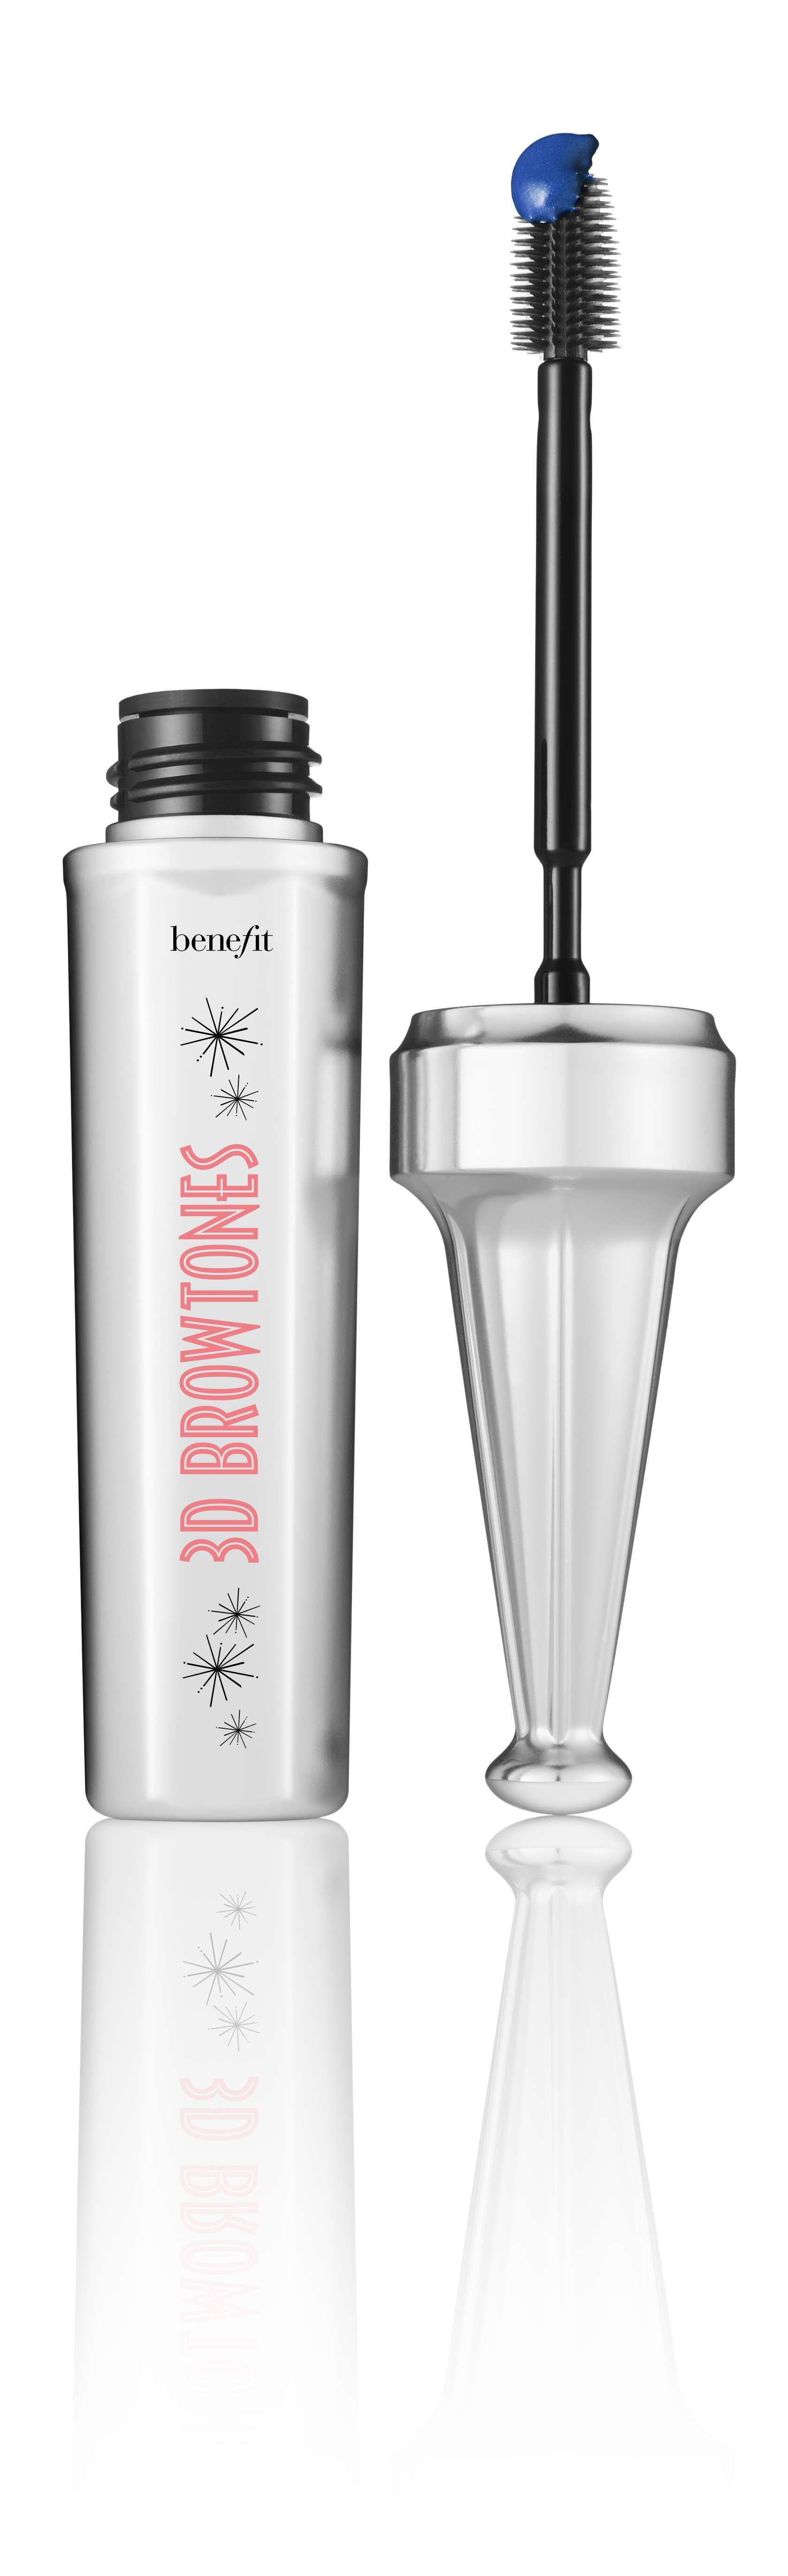 benefit just launched the perfect brow gel for coachella